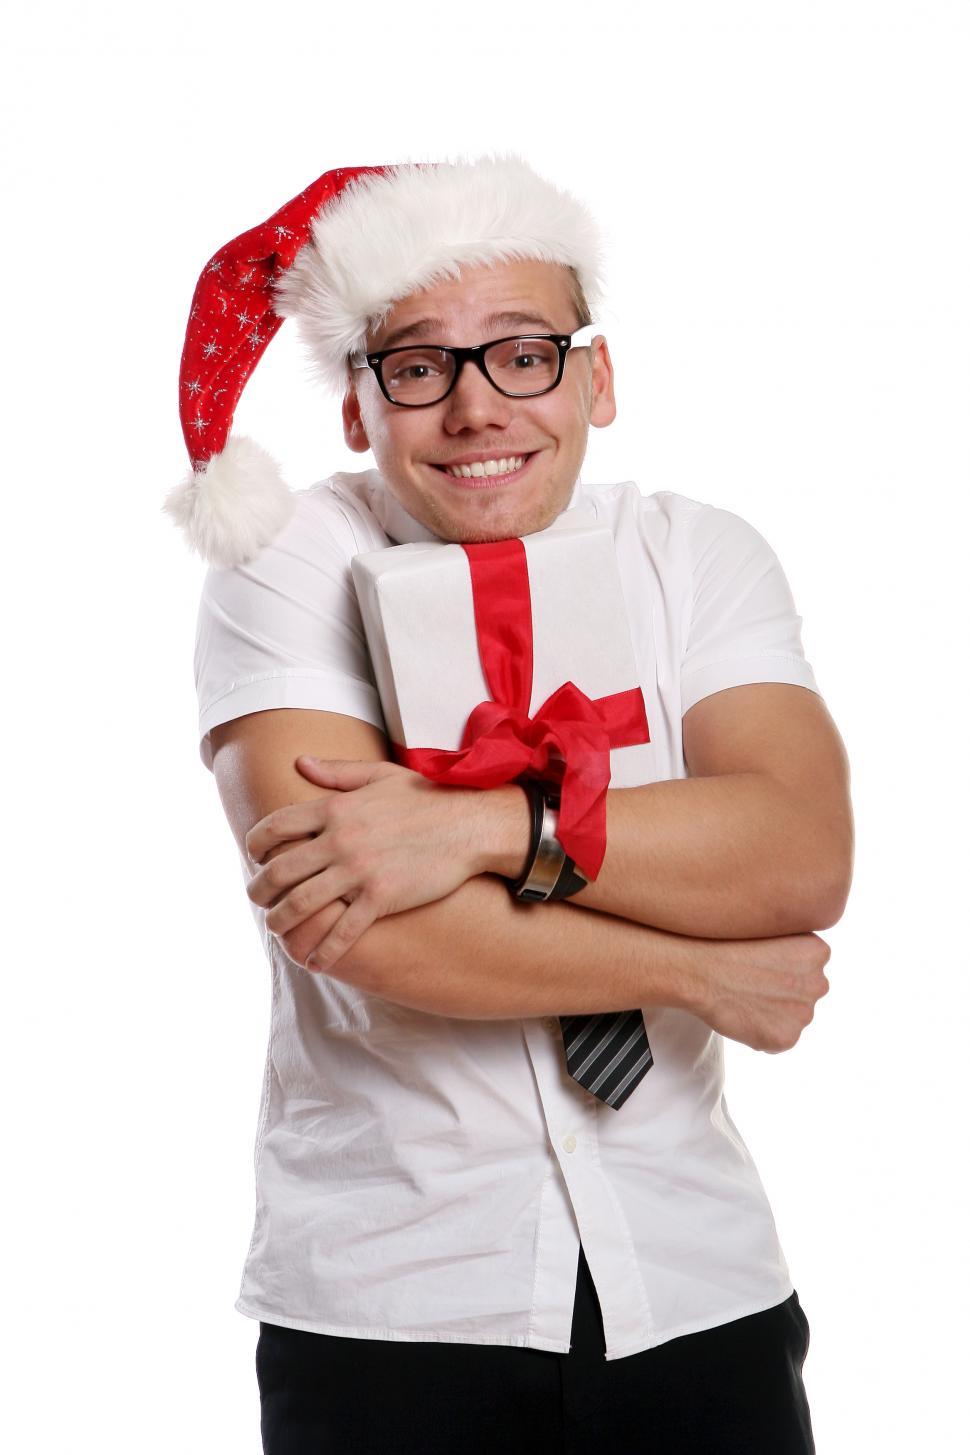 Download Free Stock Photo of Holiday office party gift guy 